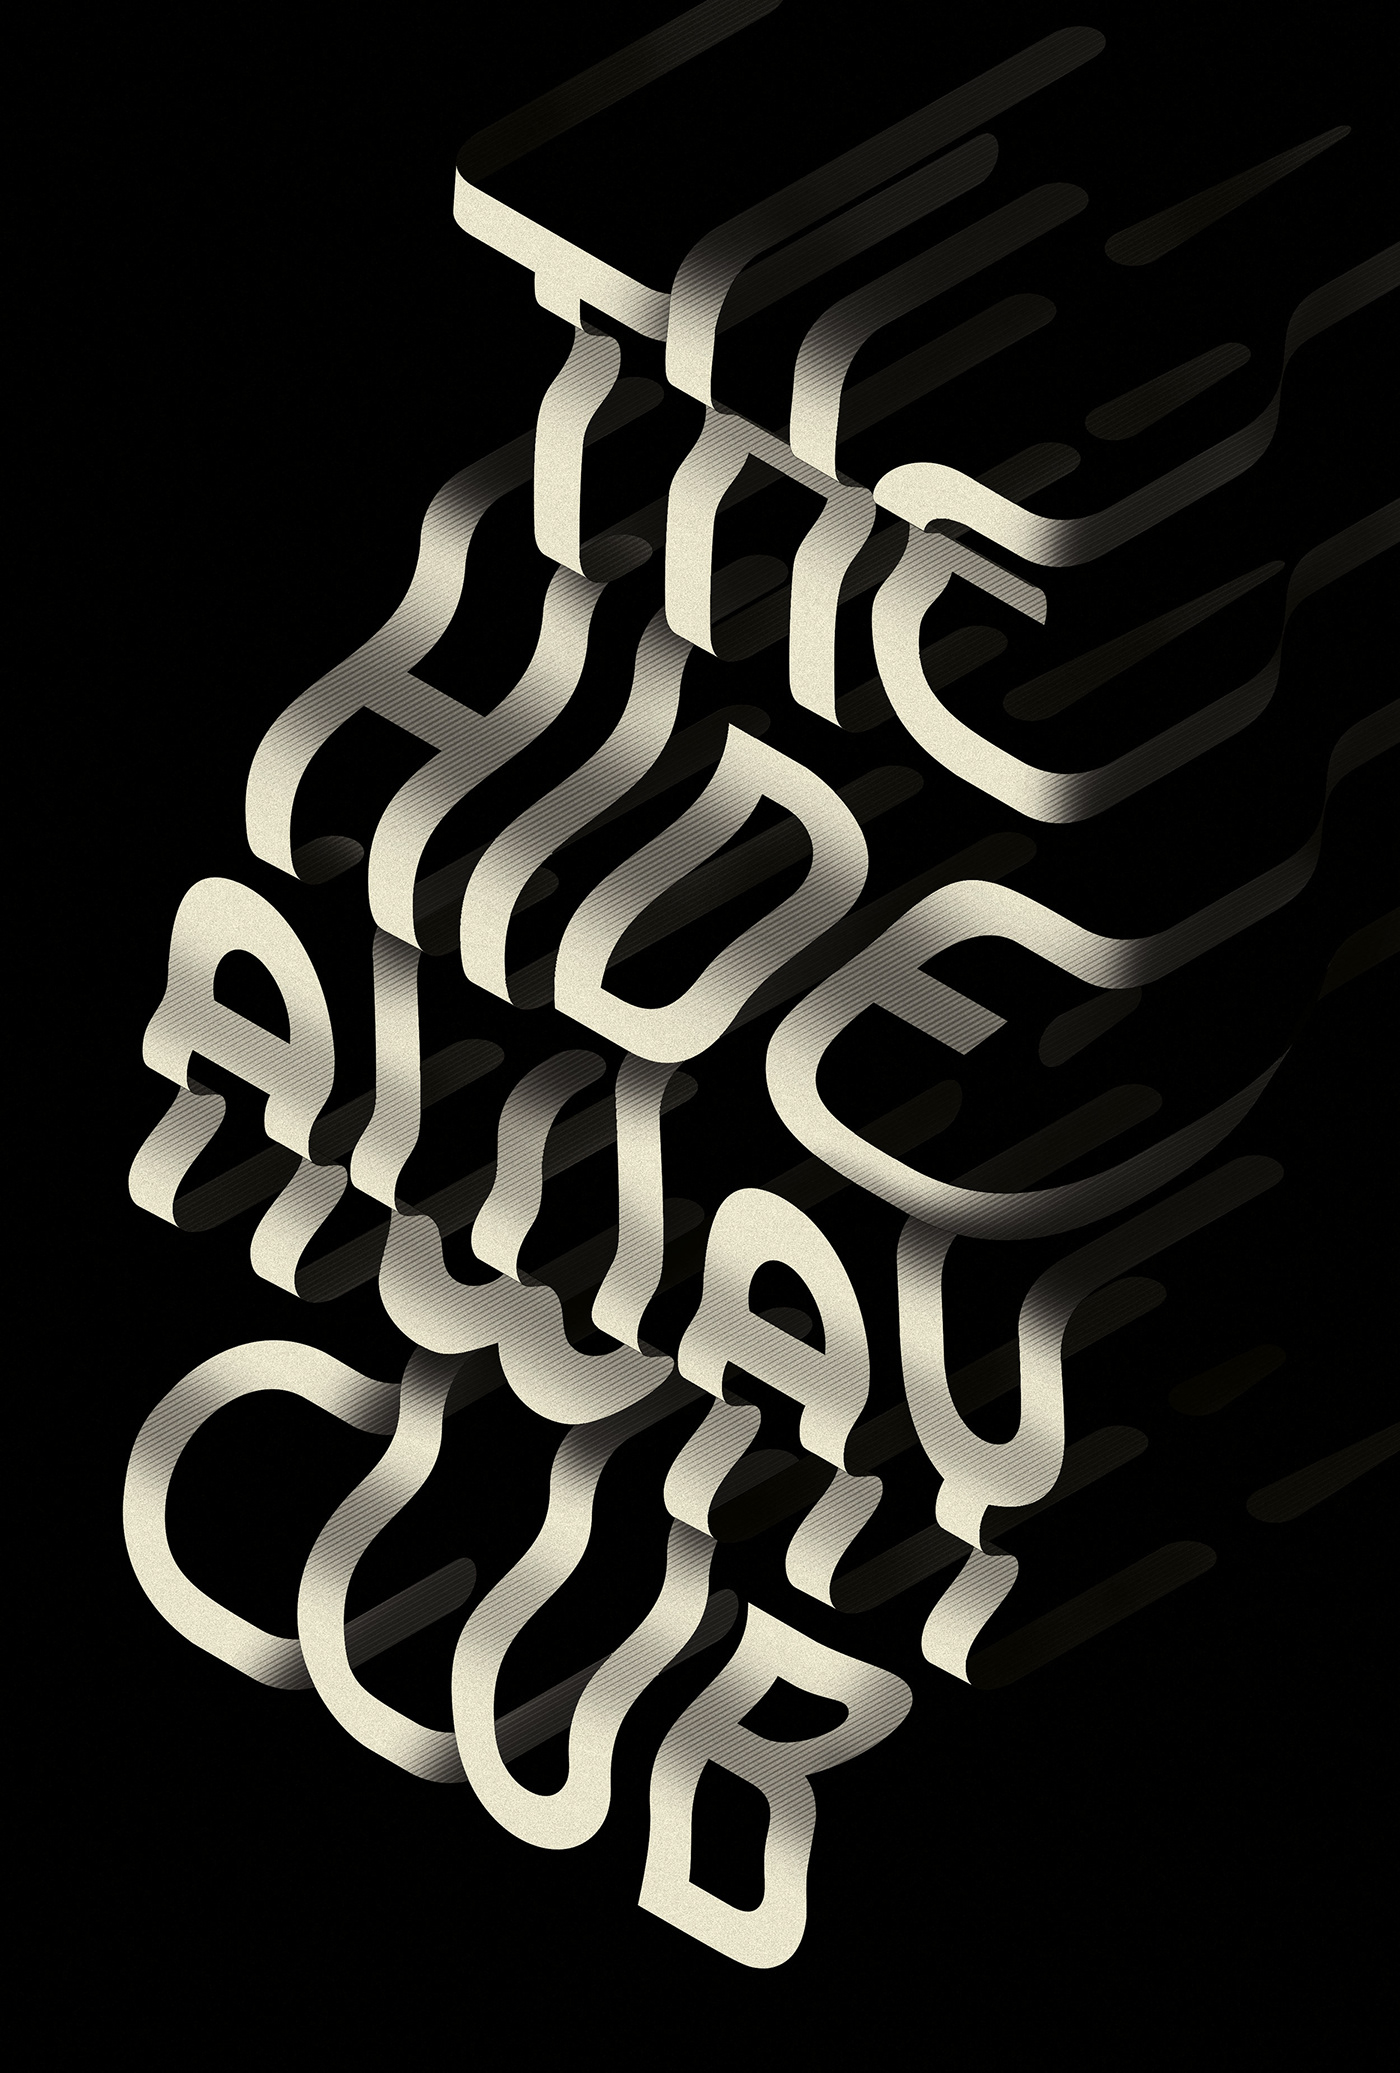 typography club by chrles williams